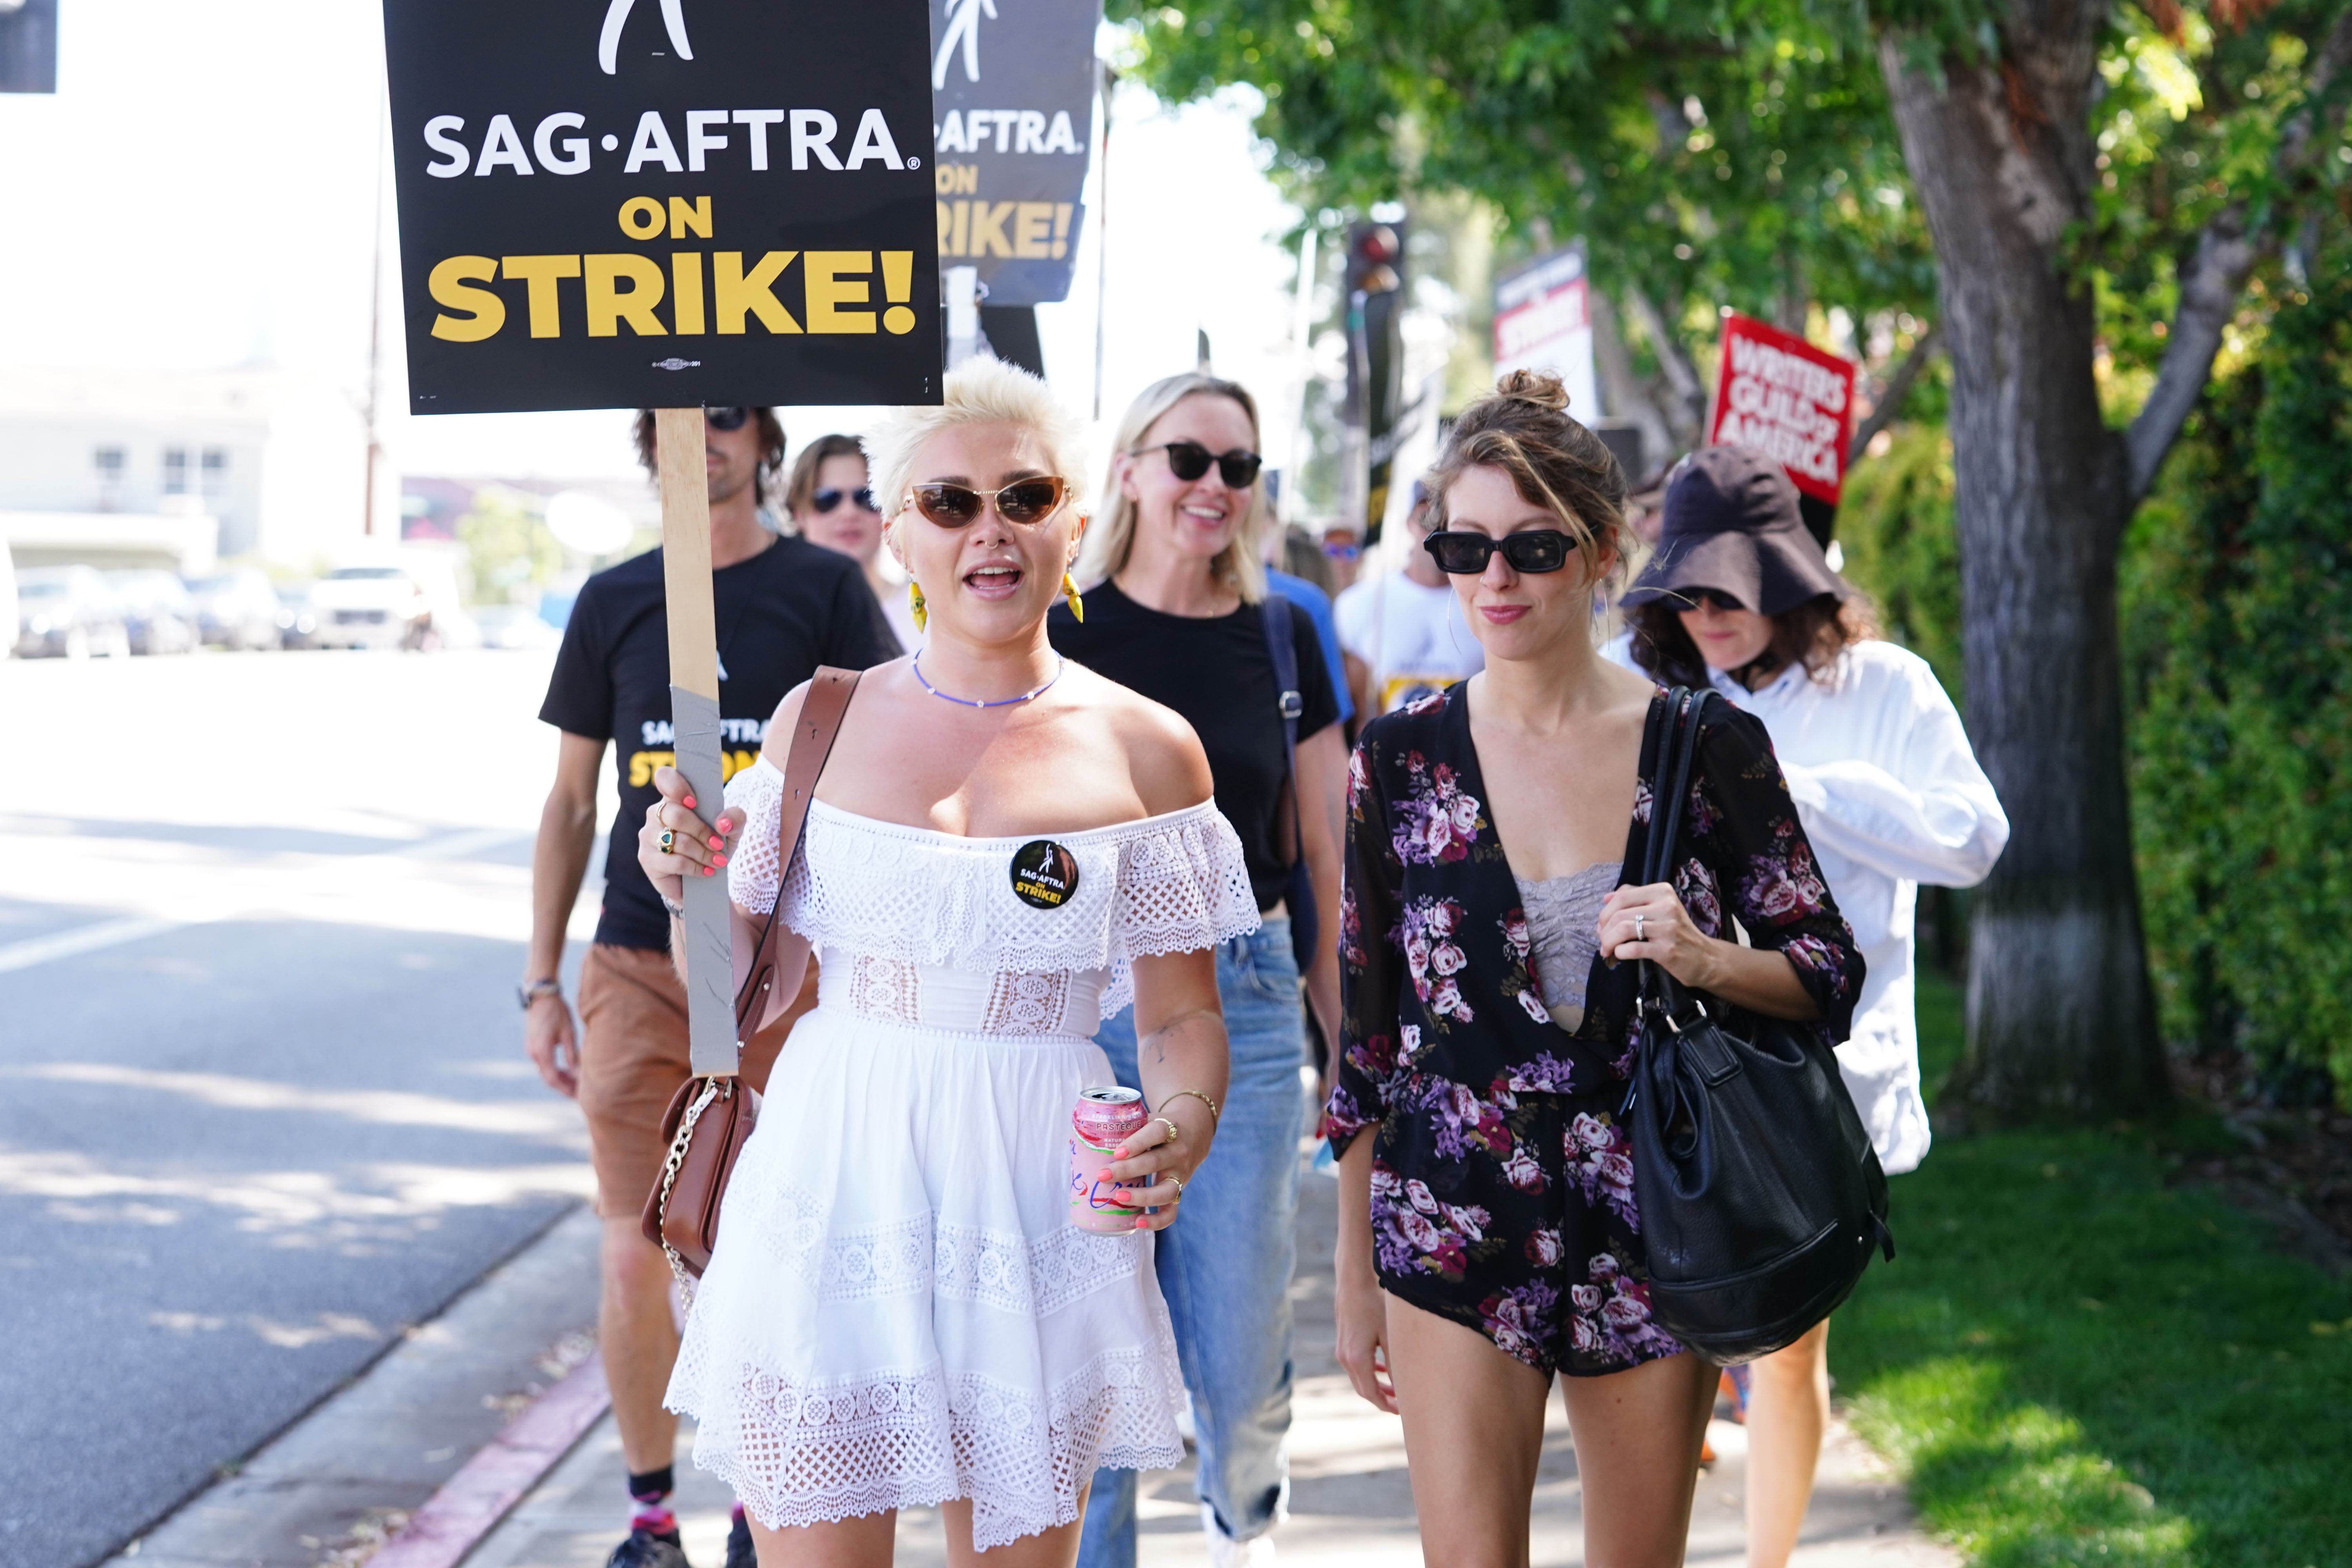 Hollywood actors agree tentative deal to end the strike